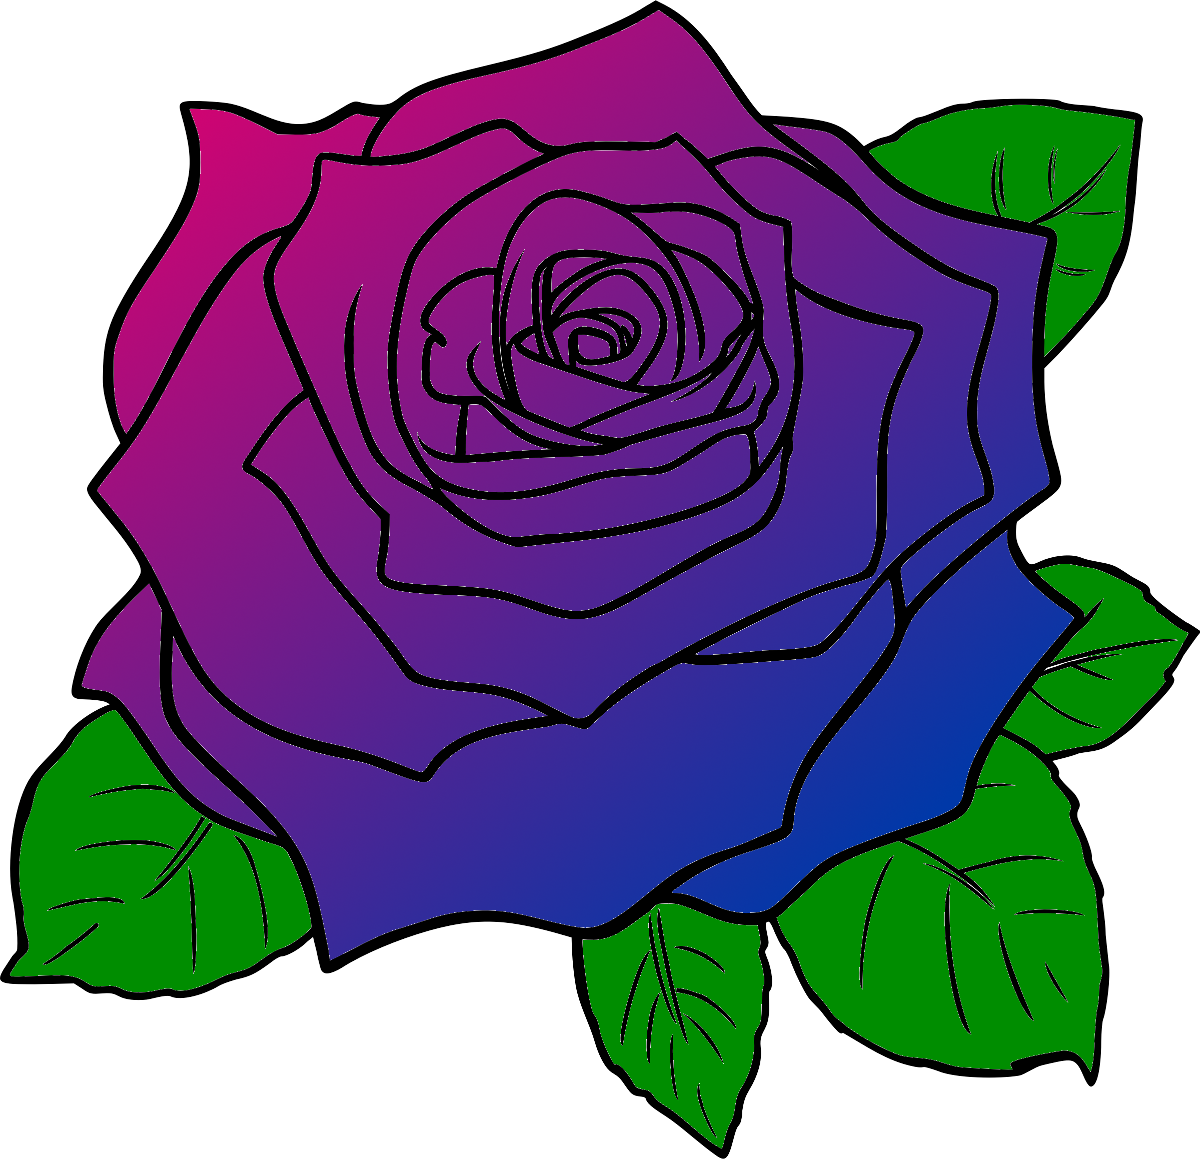 A Colorful Rose With Green Leaves